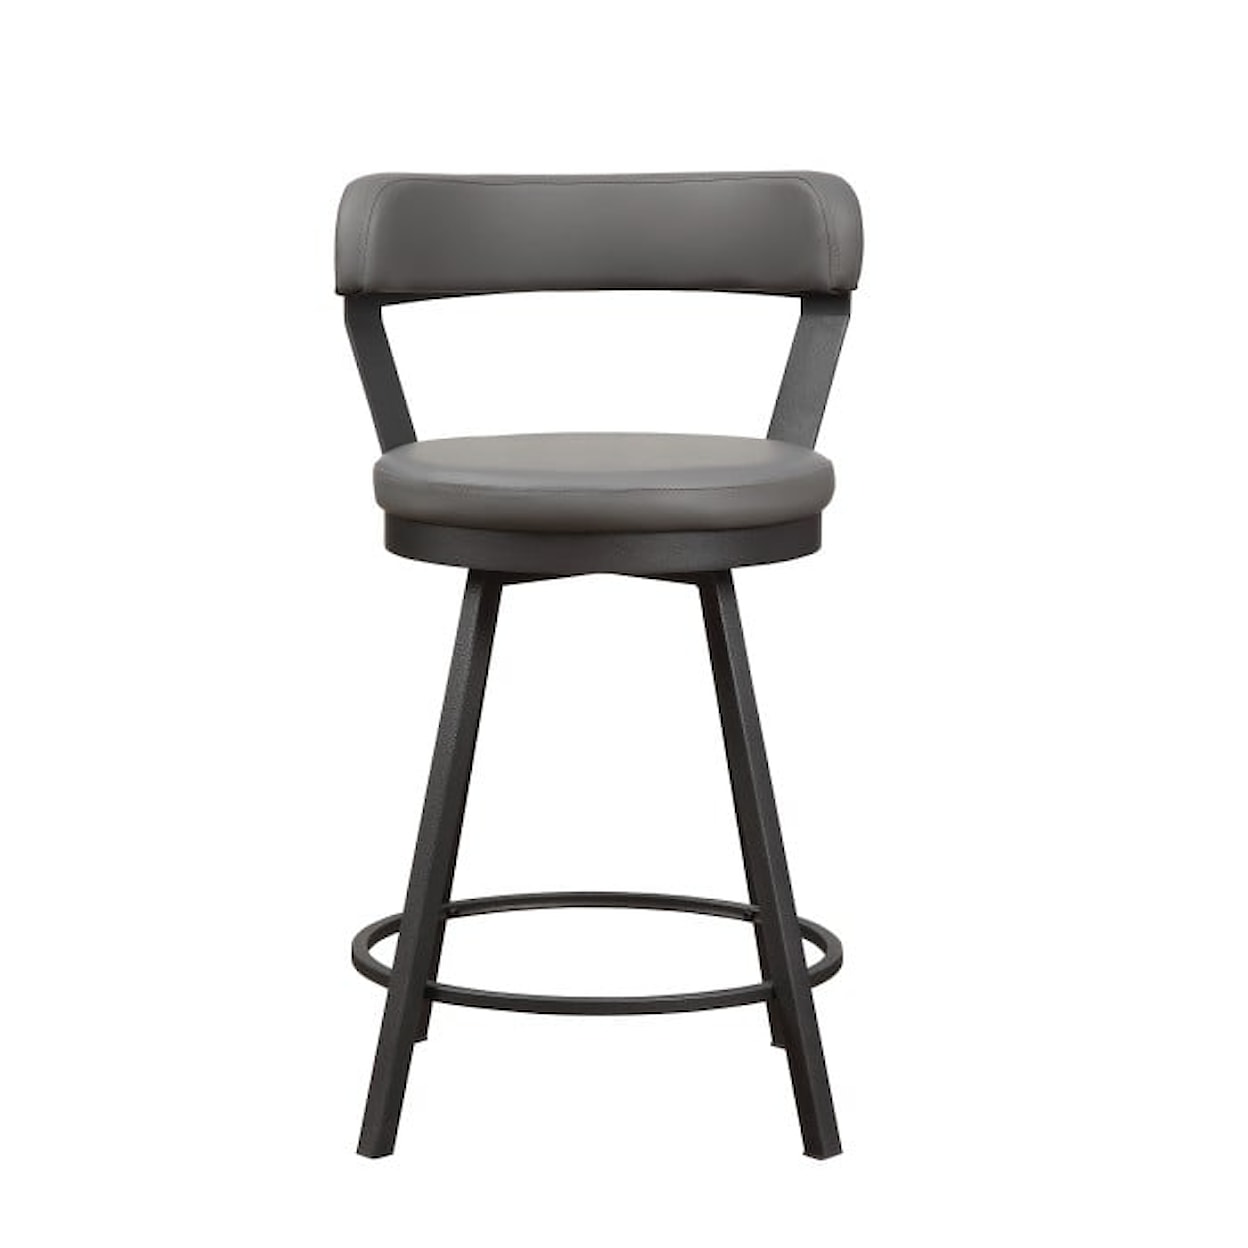 Home Style 5566 Series Counter Height Swivel Barstool